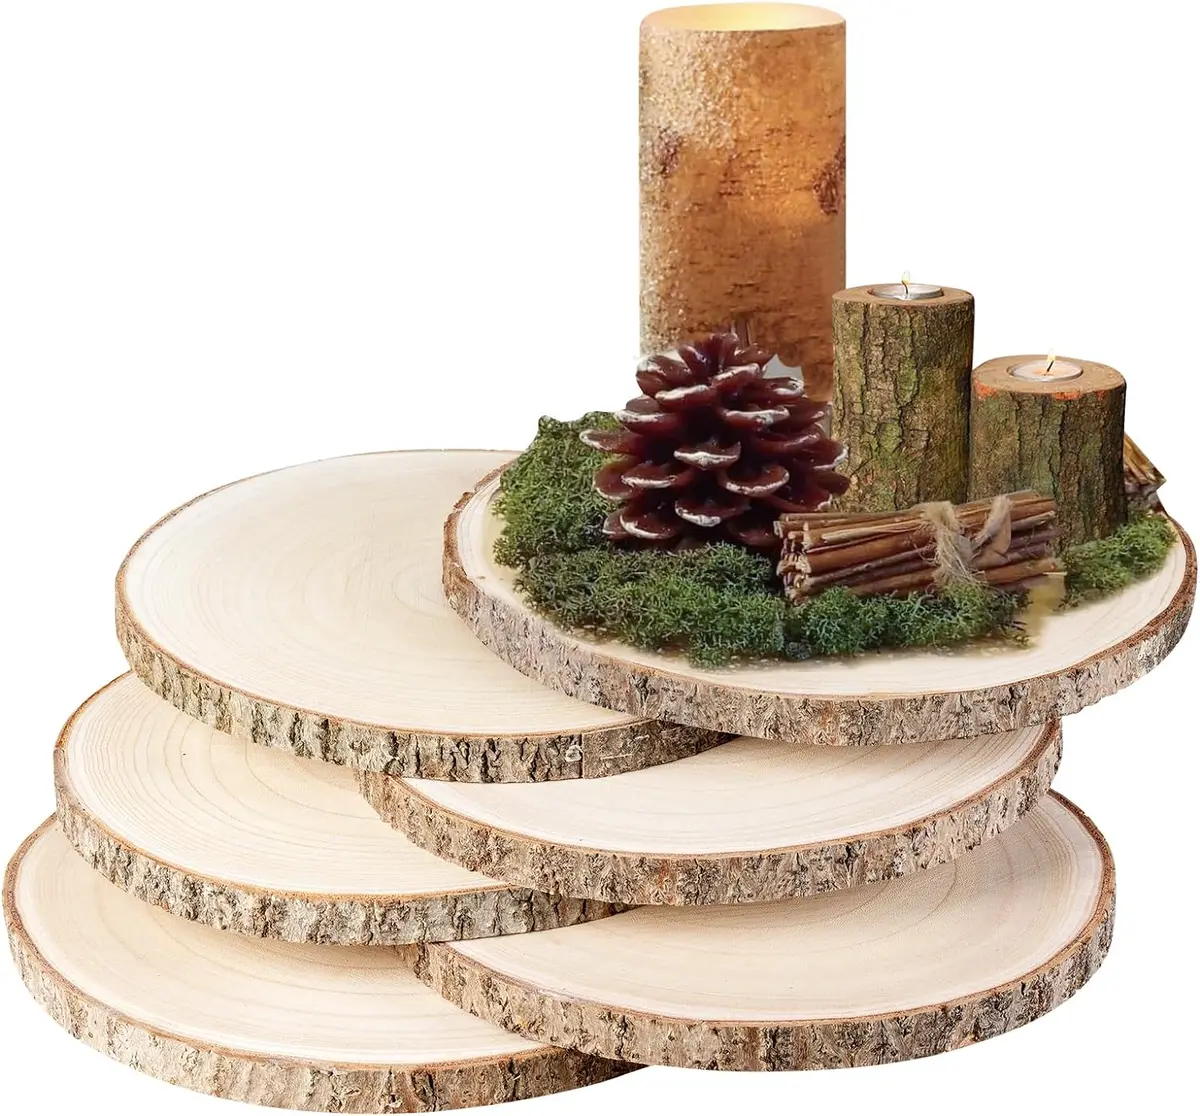 10 Pack Discount Large Wood Slices Discount Wood Slices for Wood